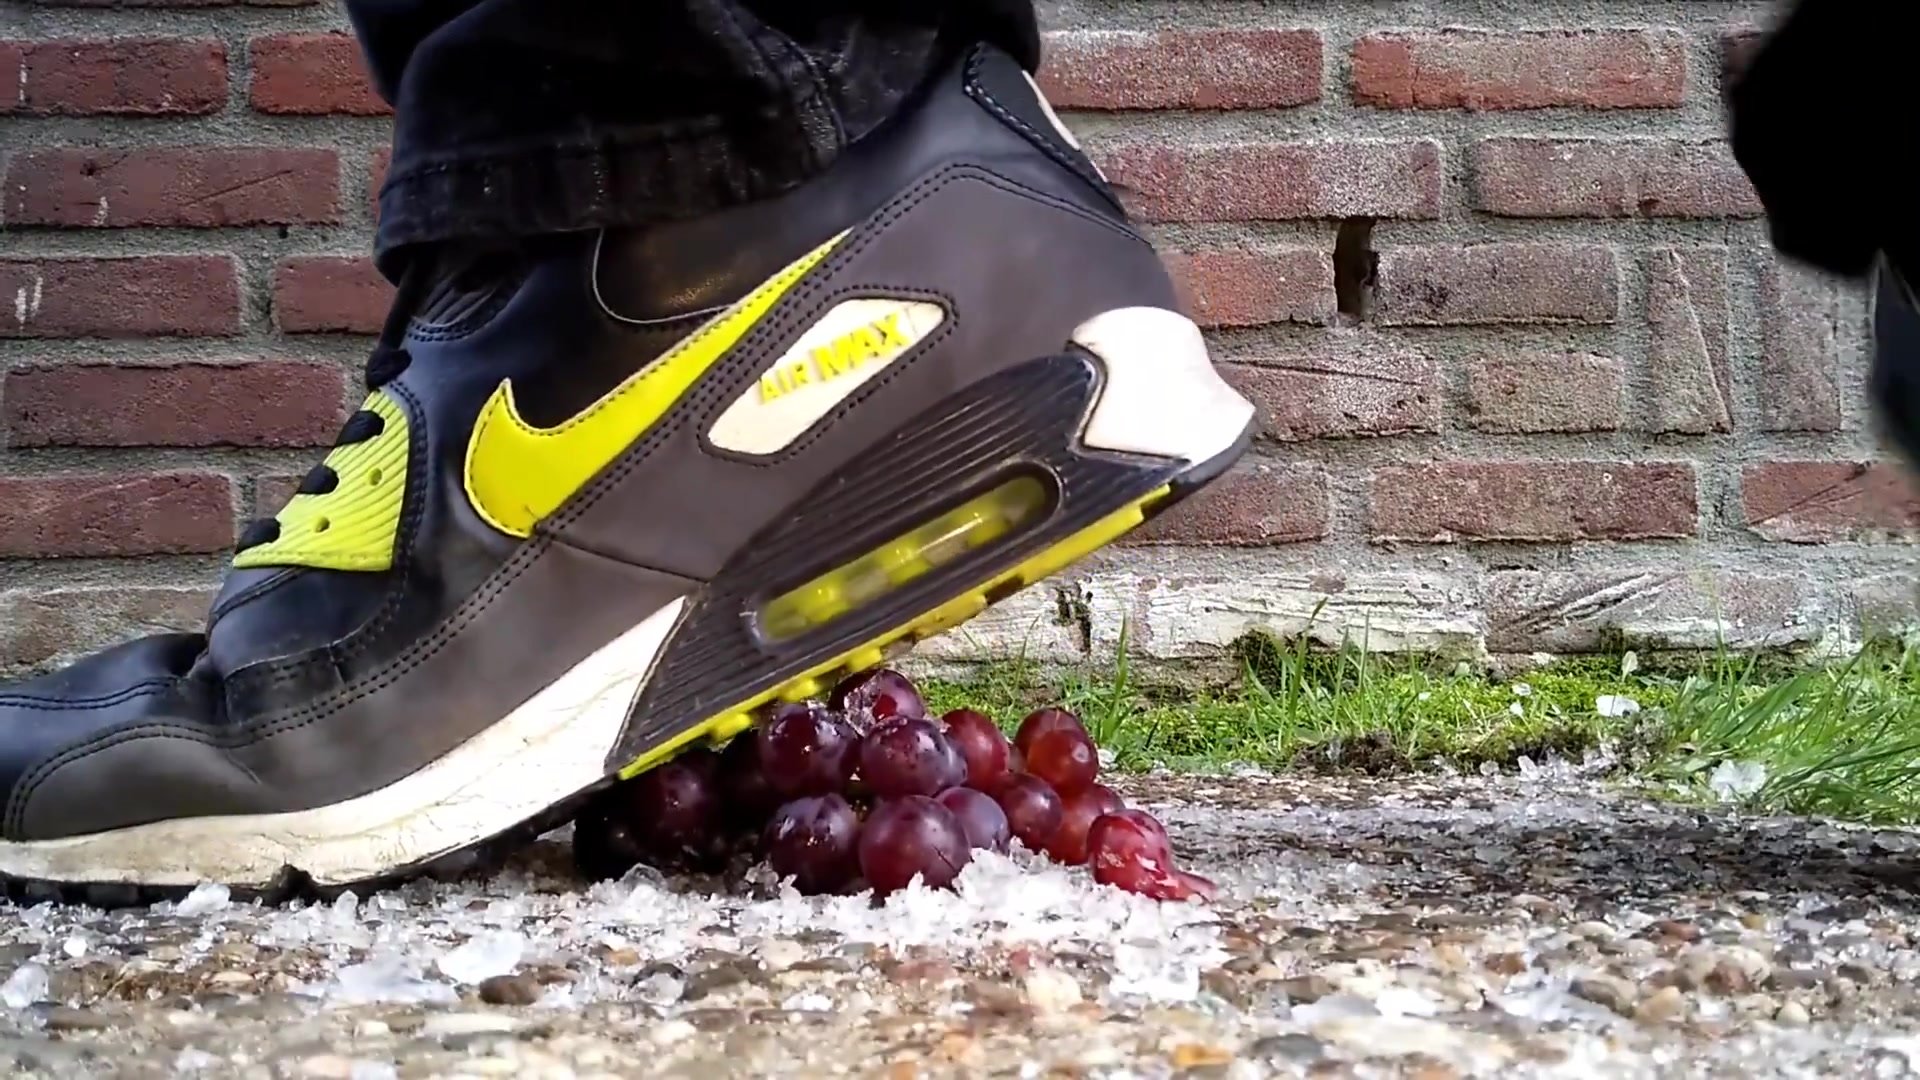 Spitting on grapes and then crushing them